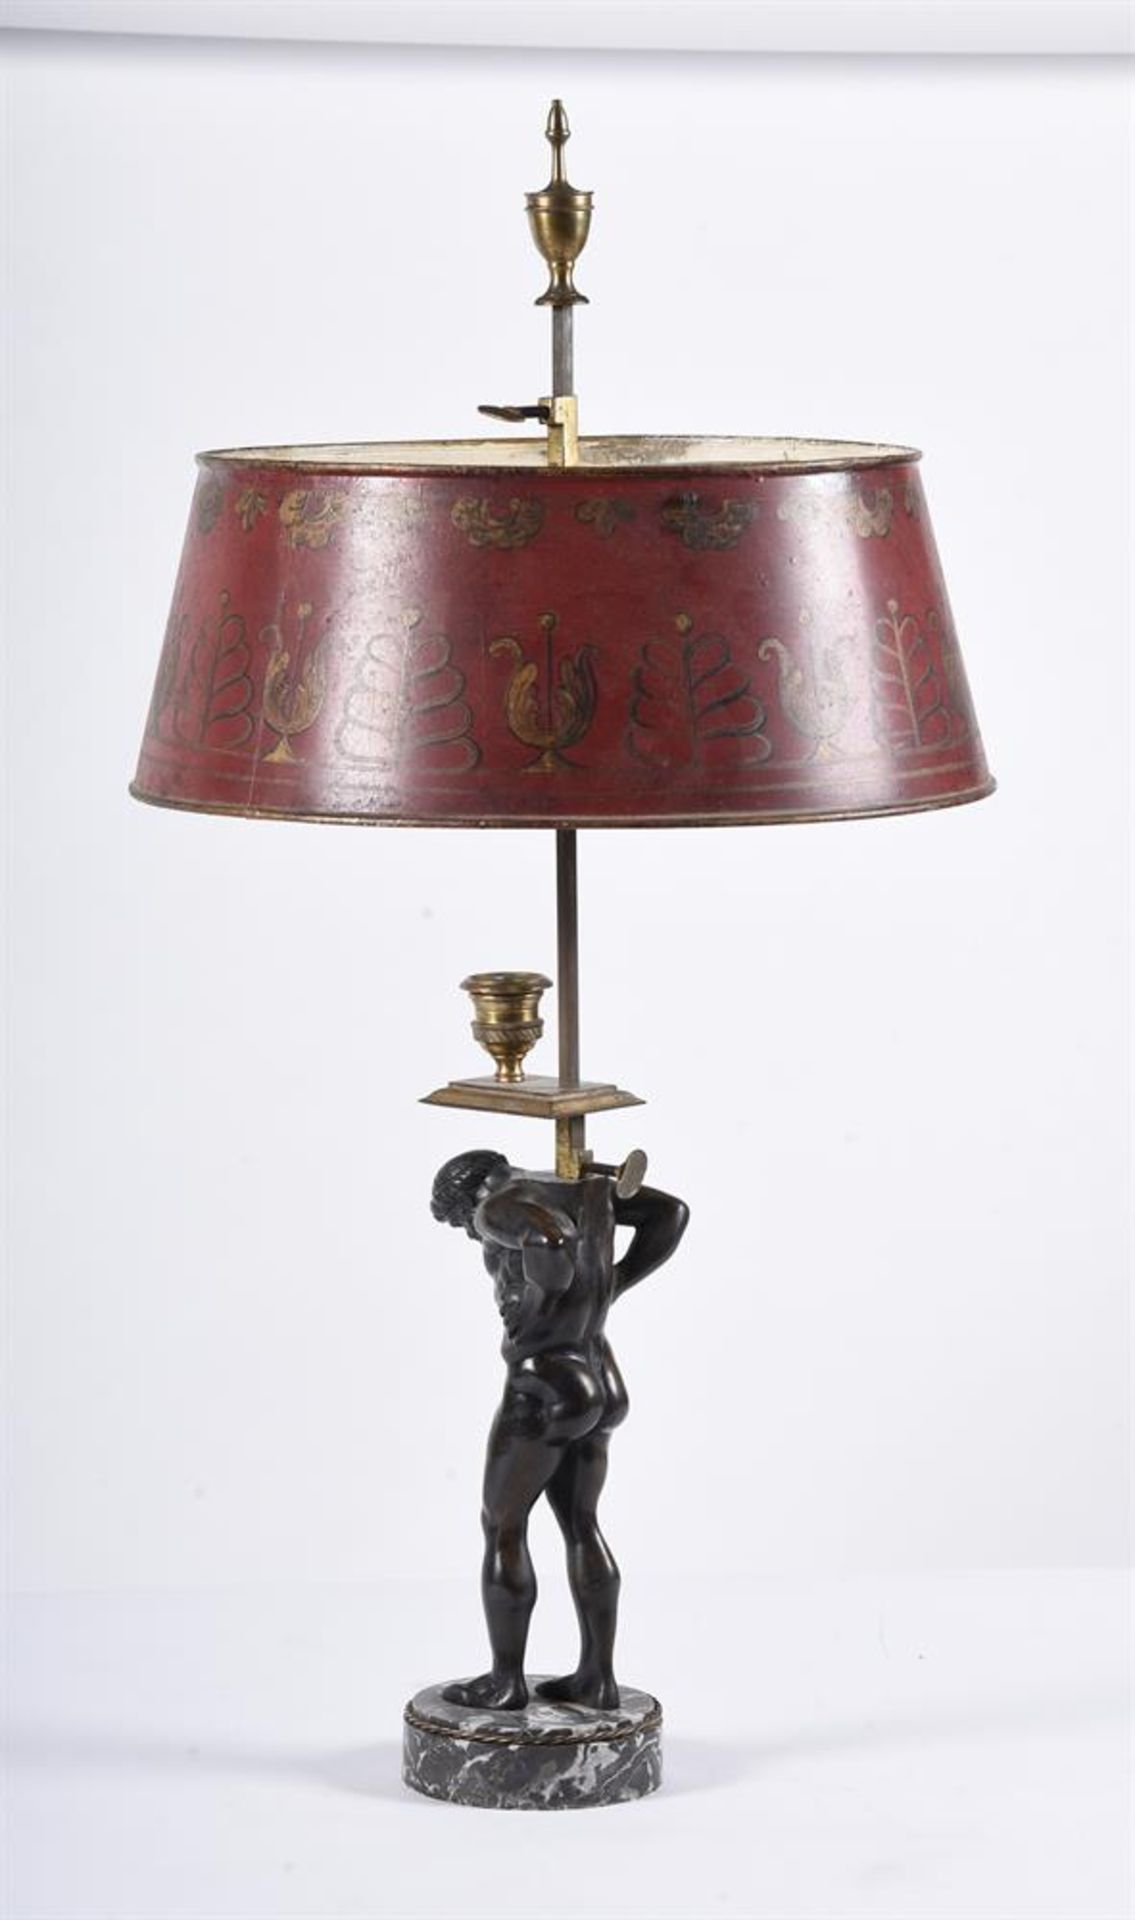 AFTER THE ANTIQUE, A BRONZE FIGURE OF ATLAS, NOW FITTED AS A LAMP, PROBABLY ITALIAN - Image 3 of 3